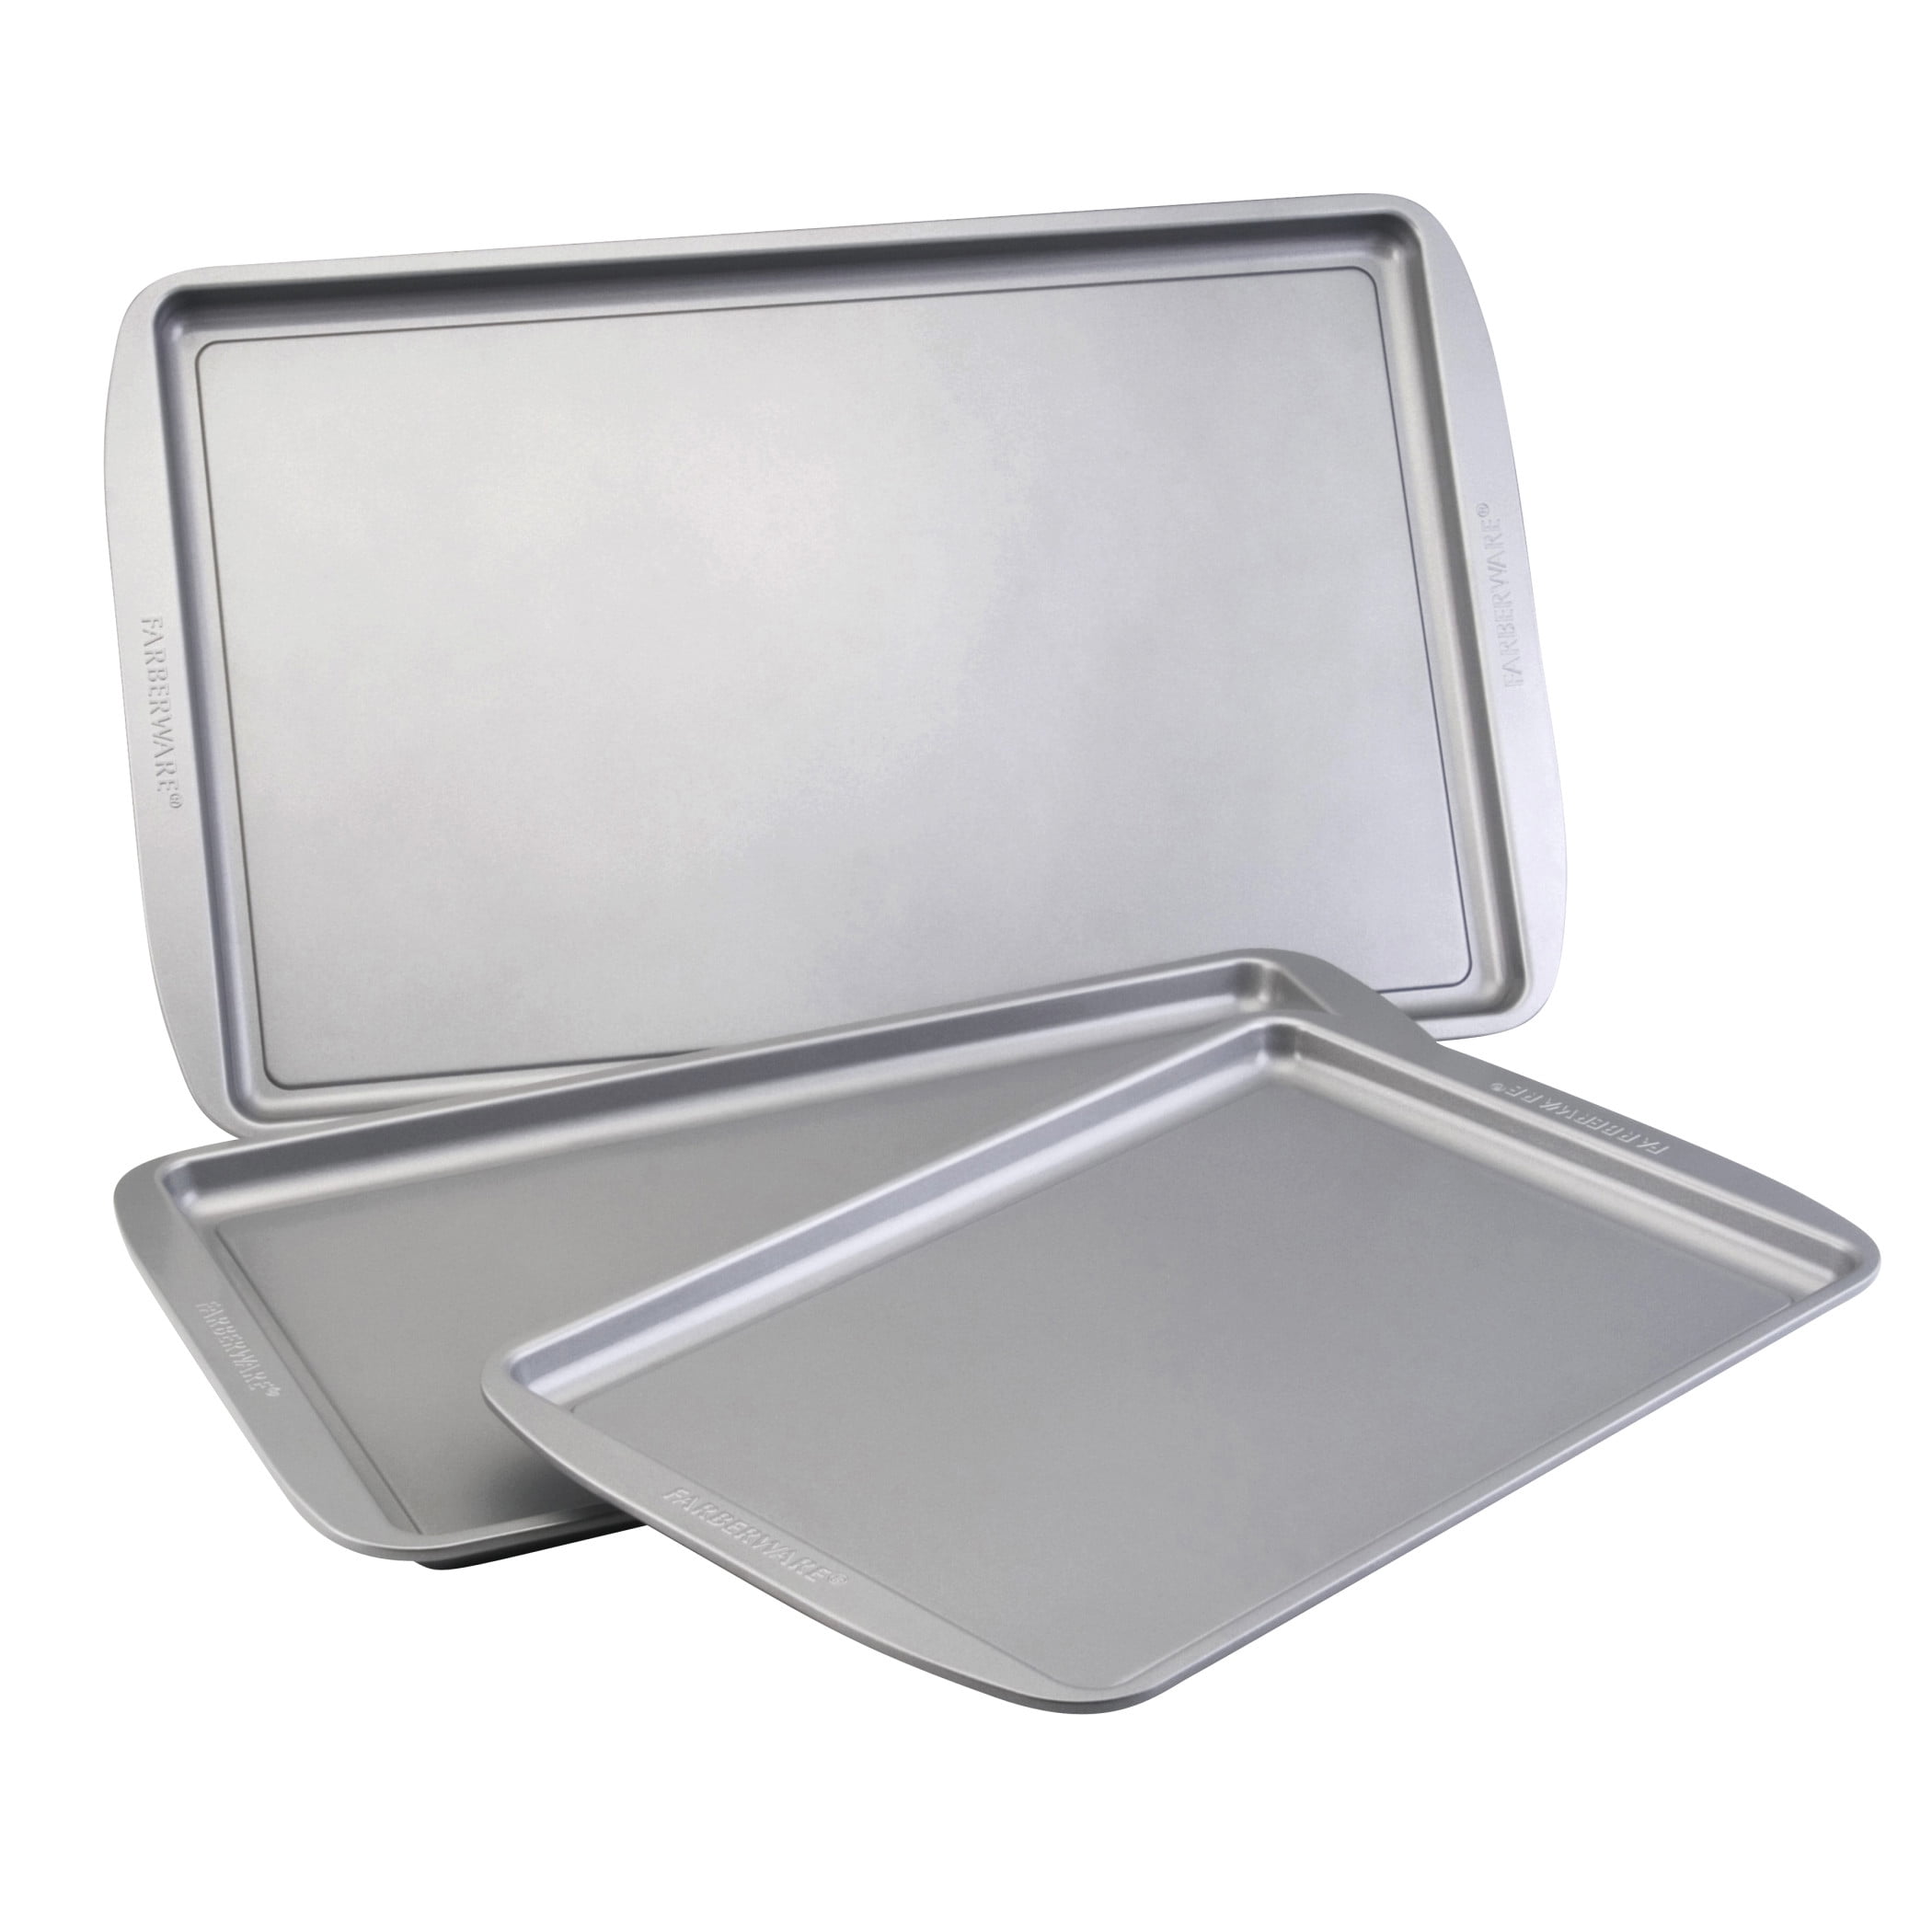 Cookie Baking Sheets Pan Set Bakeware Steel Non Stick Oven 3 Pc Sheet Tray NEW 